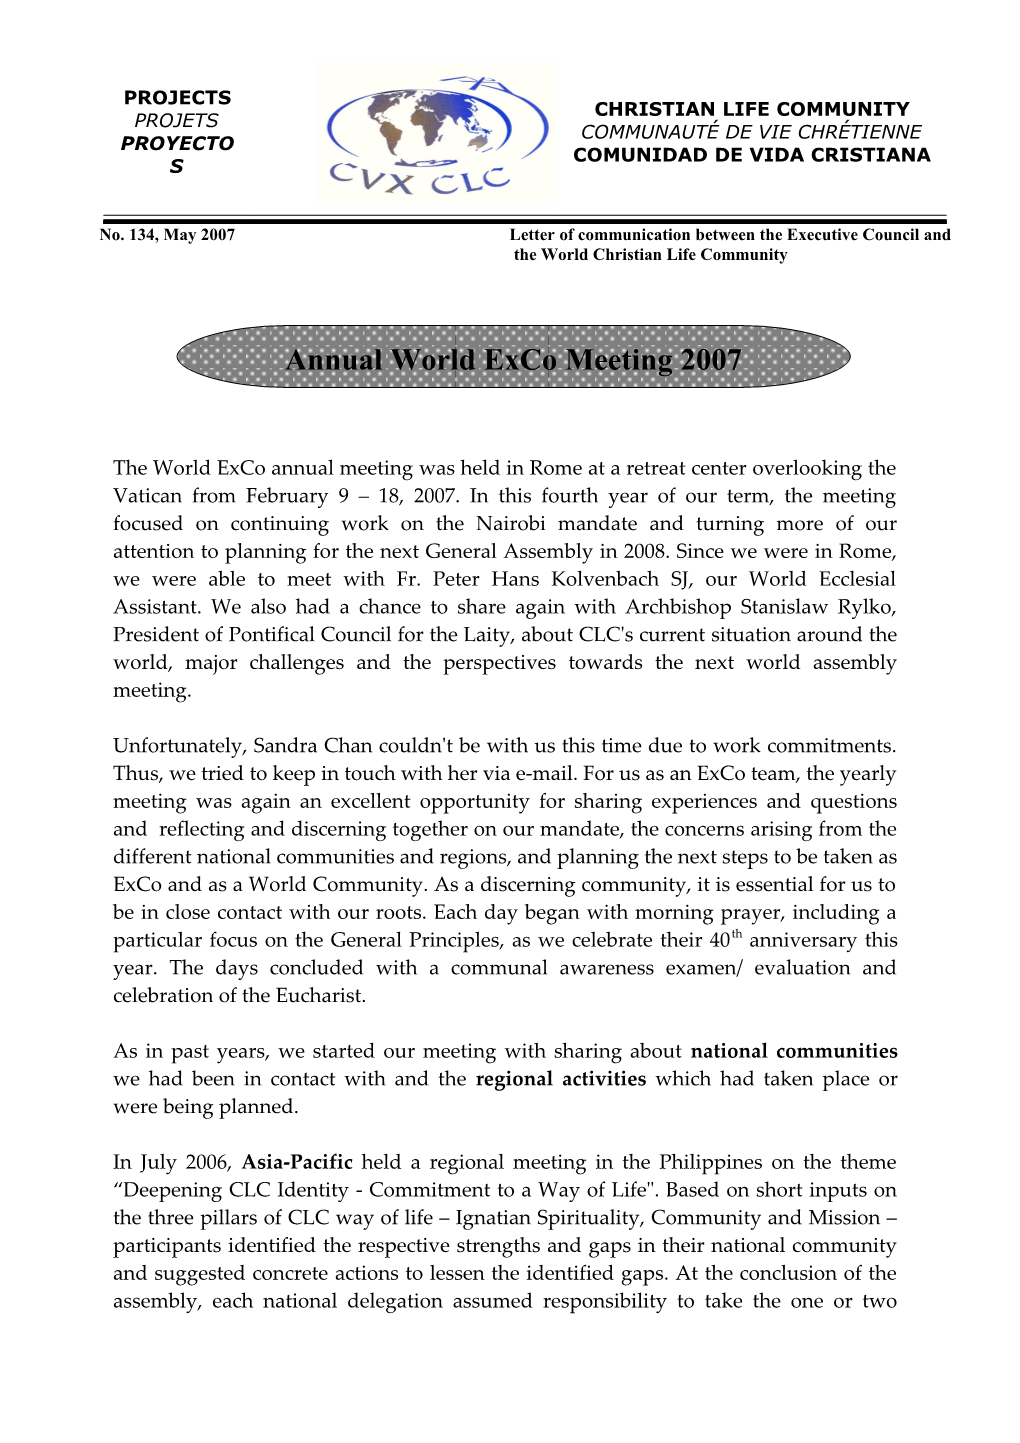 No. 134, May 2007 Letter of Communication Between the Executive Council and the World